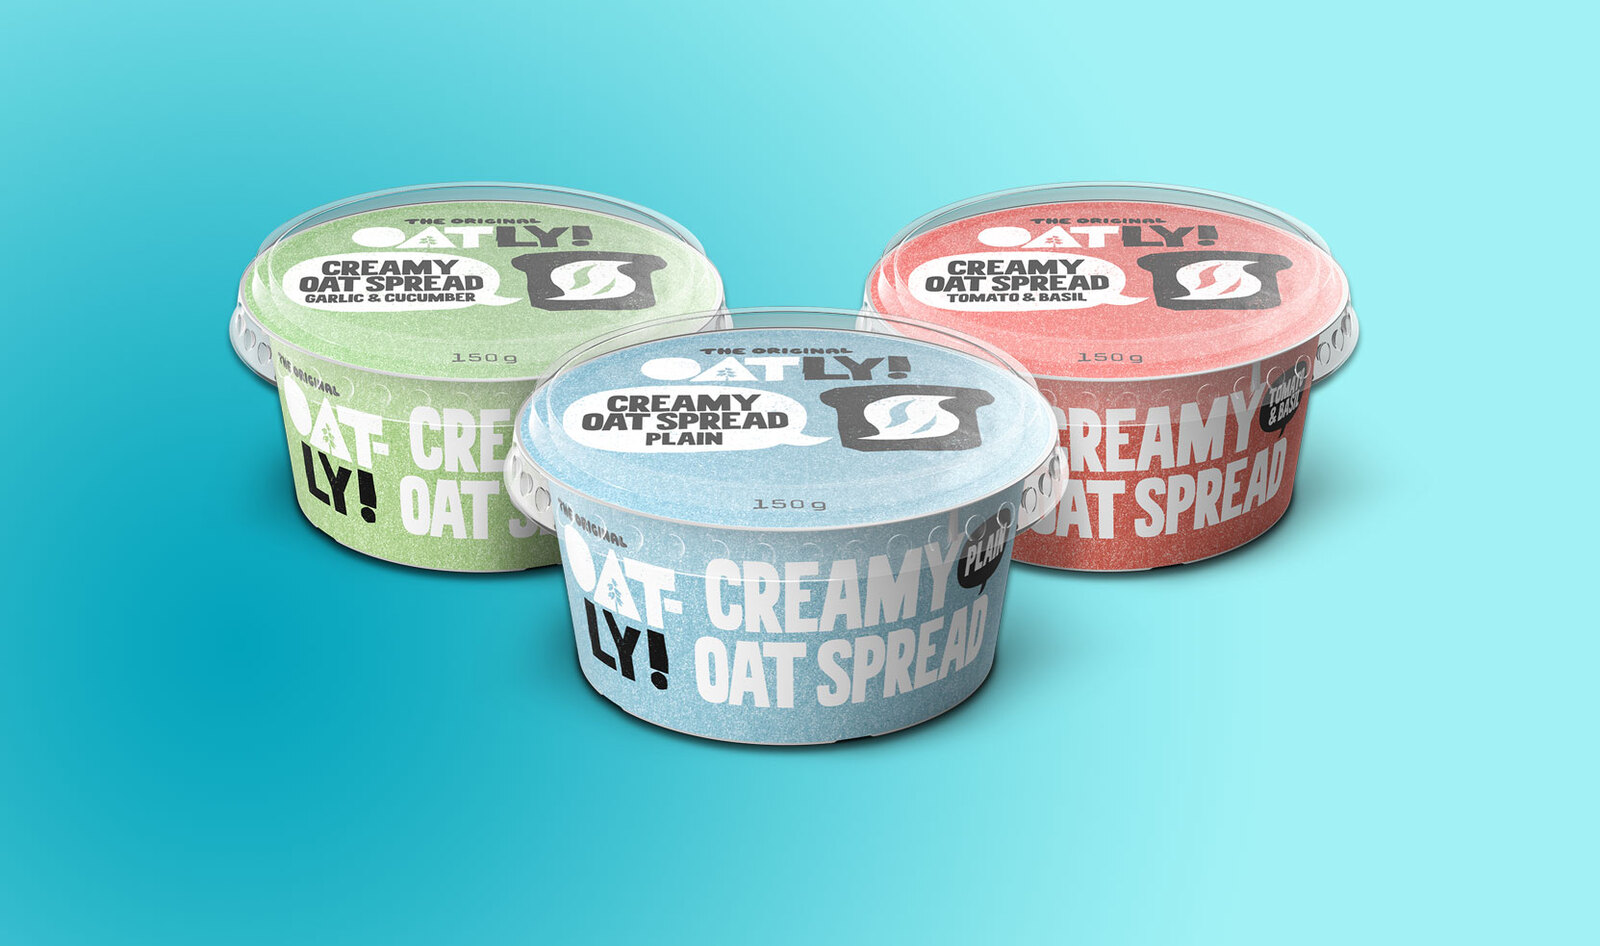 Oatly Just Launched Its First Vegan Cream Cheese Line in the UK